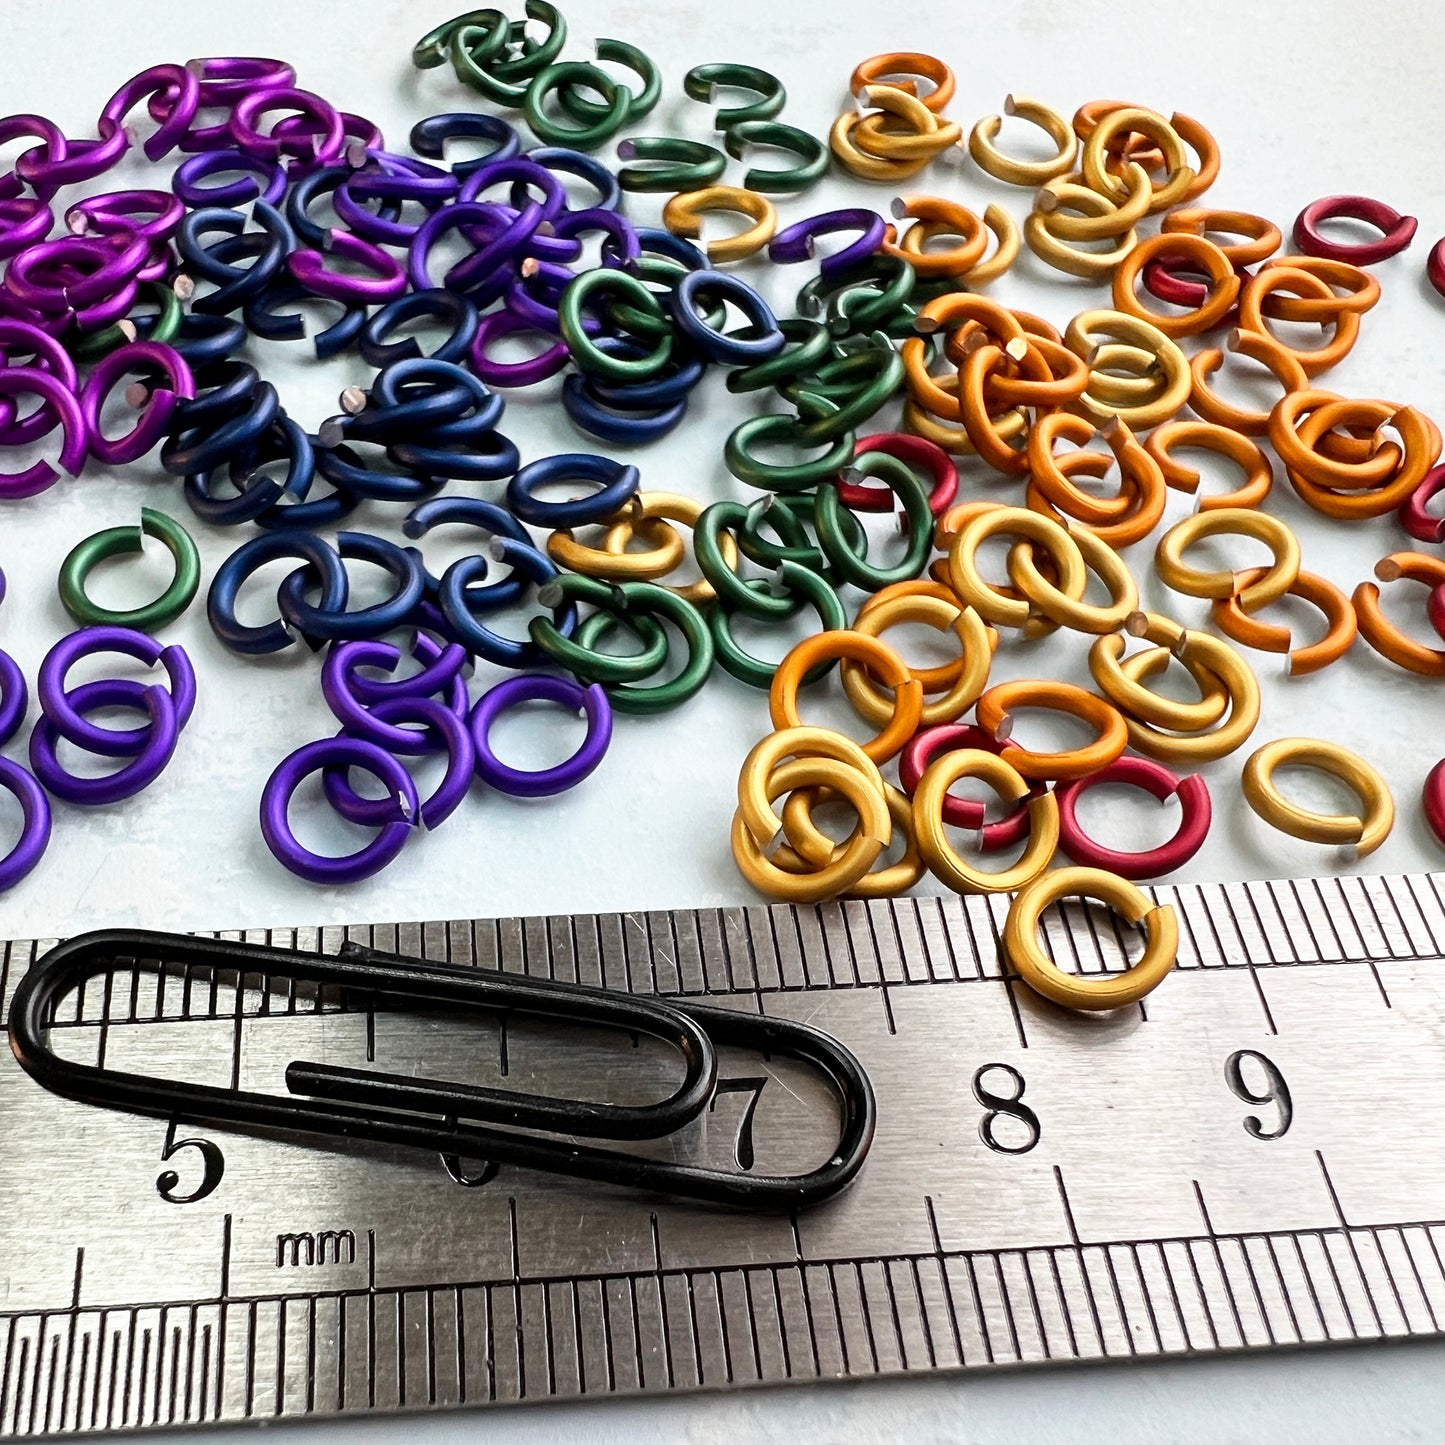 18g 5/32" SWG Jump Rings Rainbow Mixed - hand picked- choose matte or shiny